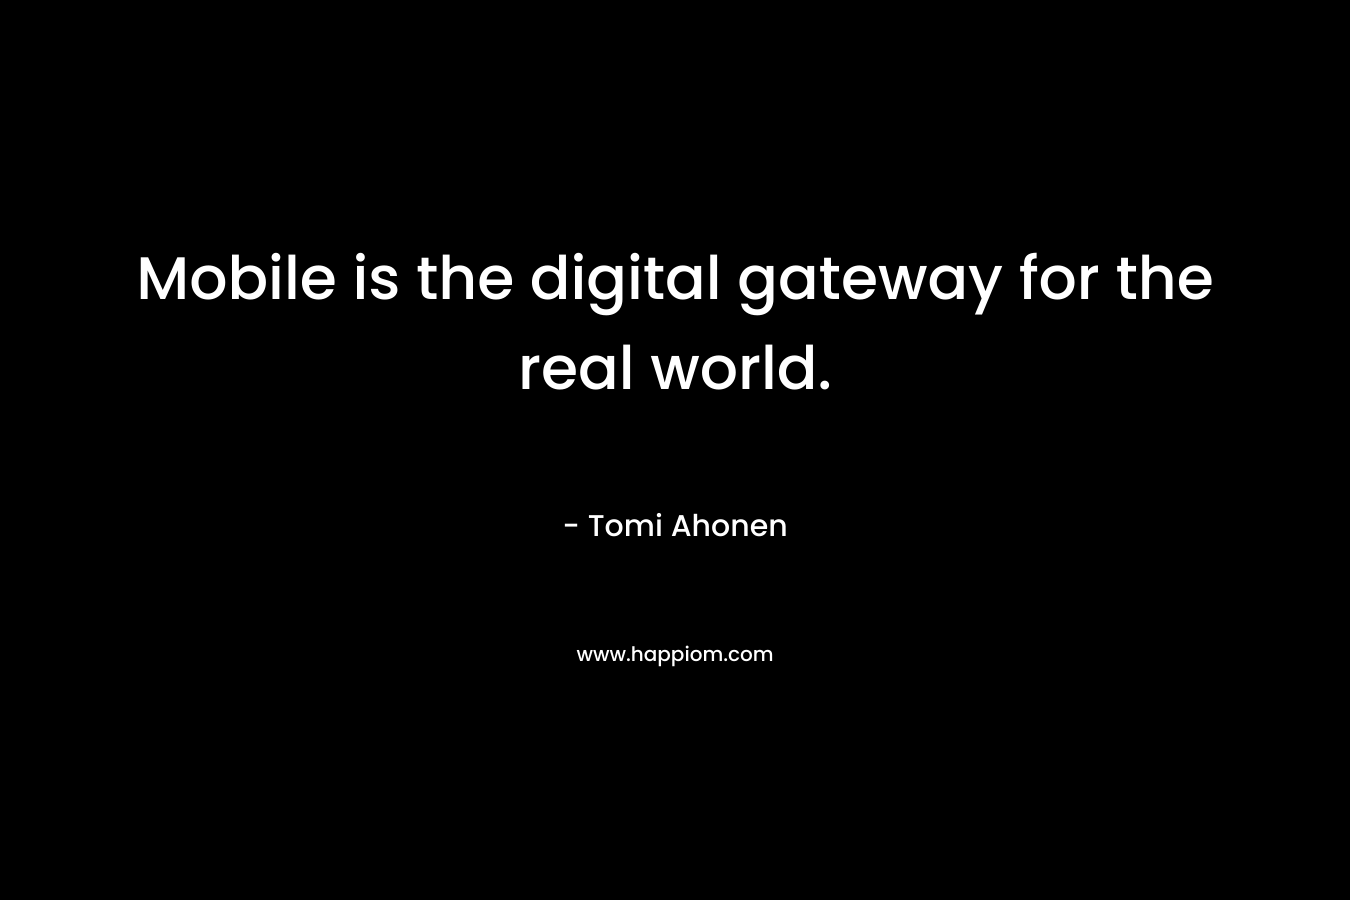 Mobile is the digital gateway for the real world.